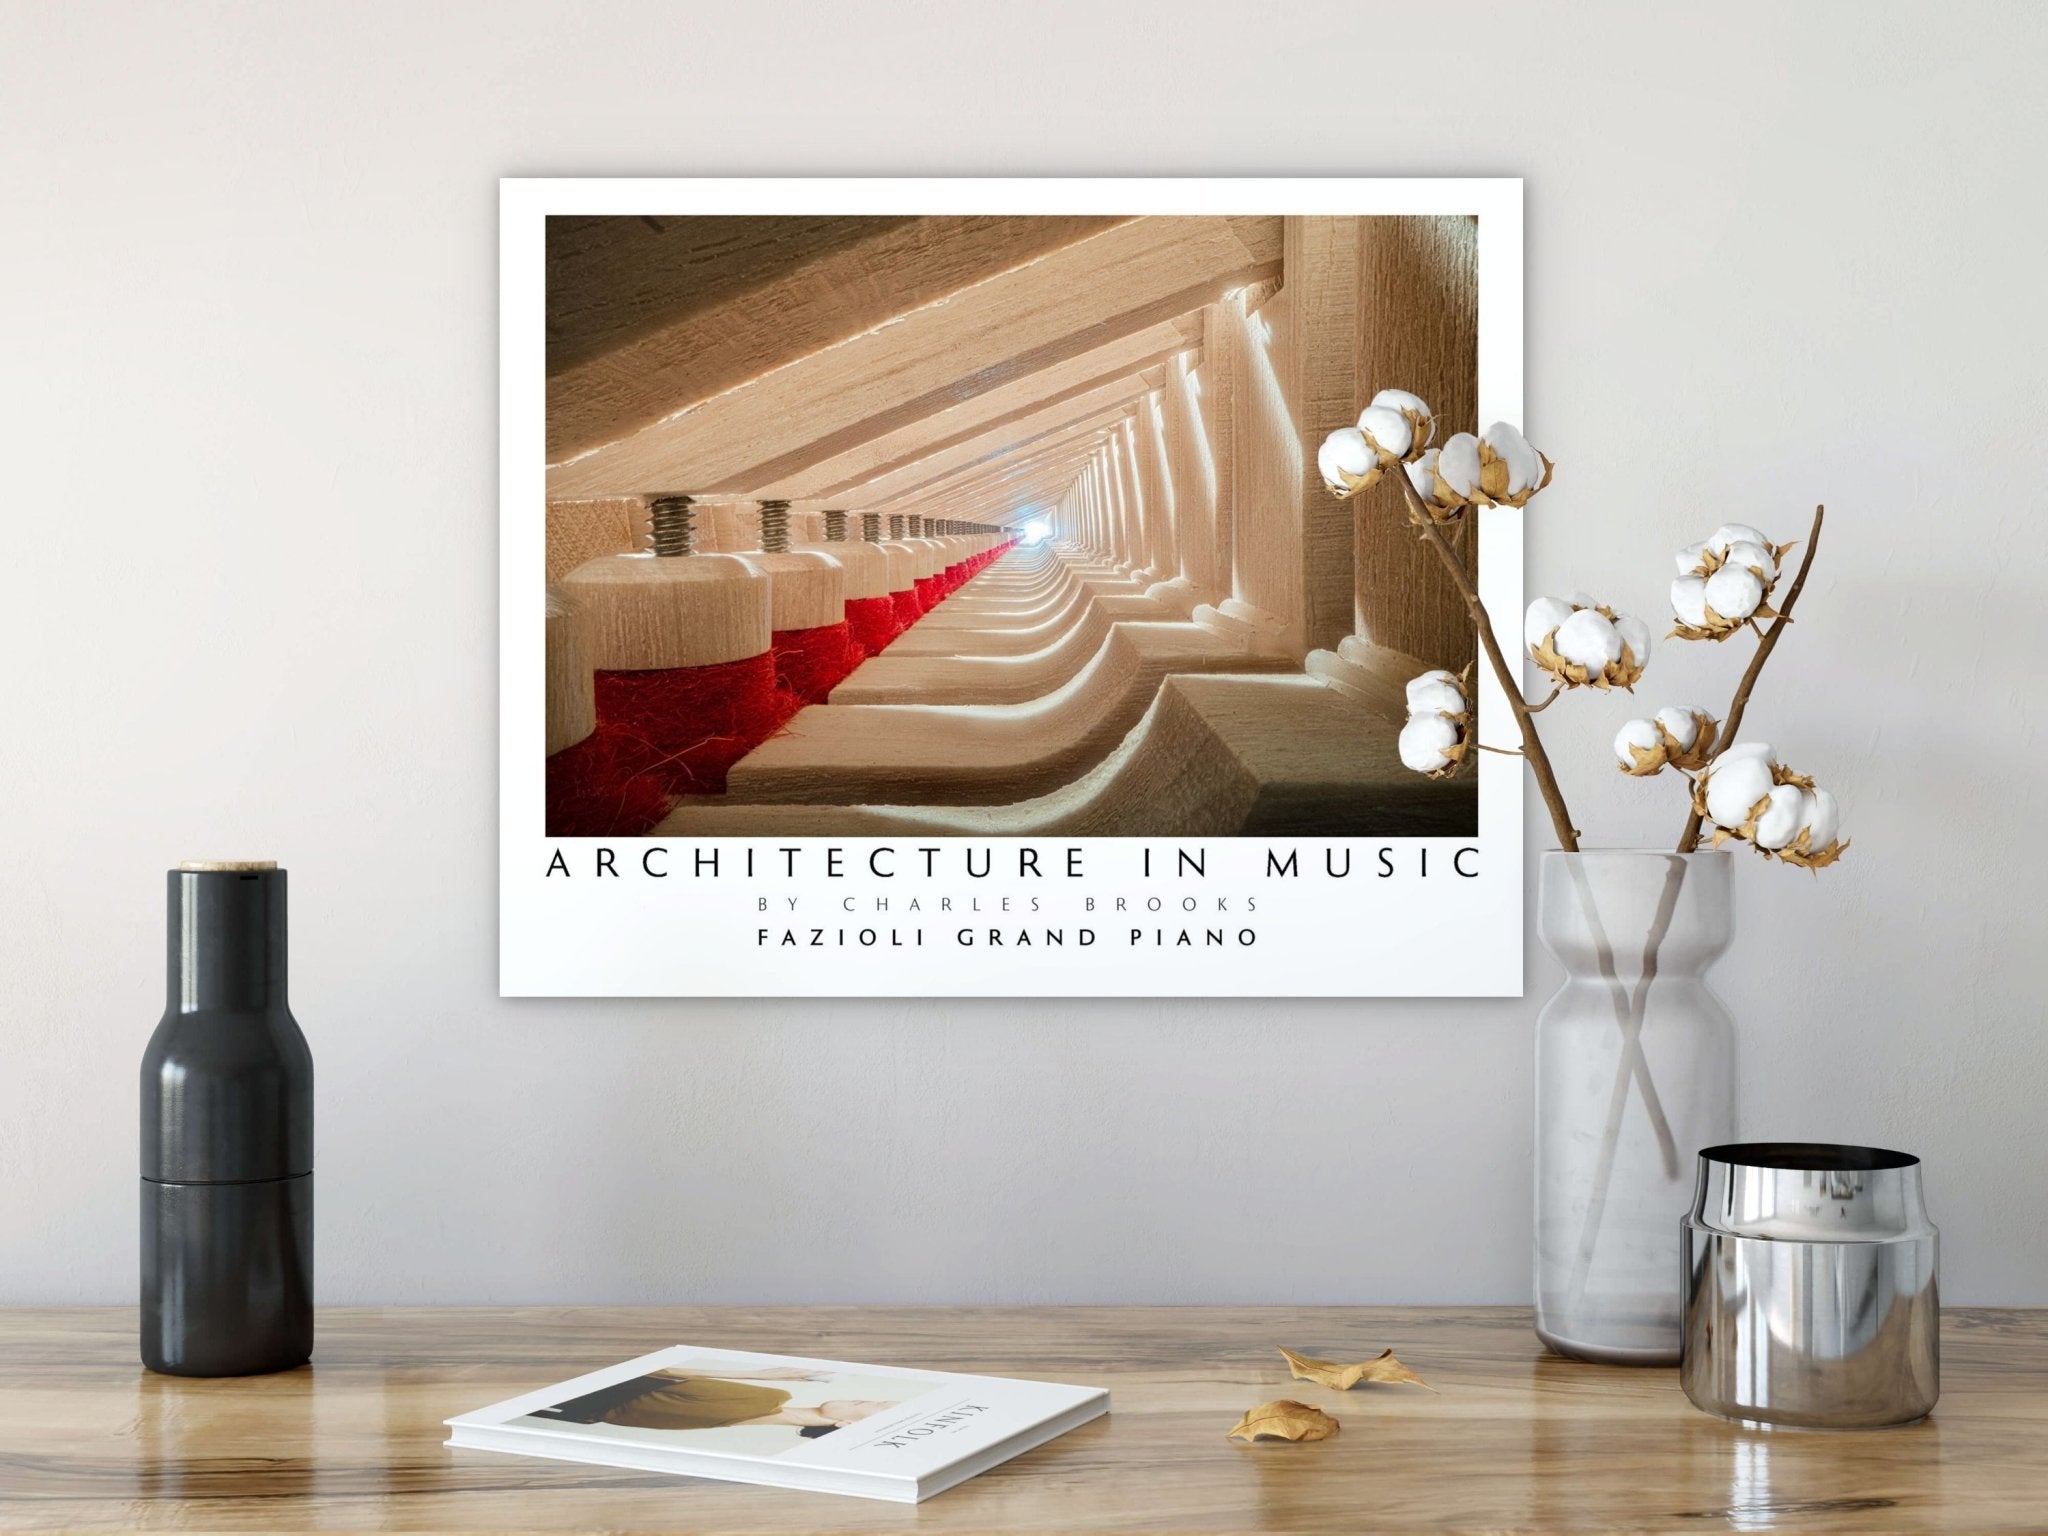 Photo of Fazioli Grand Piano Part 1. High Quality Poster. - Giclée Poster Print - Architecture In Music